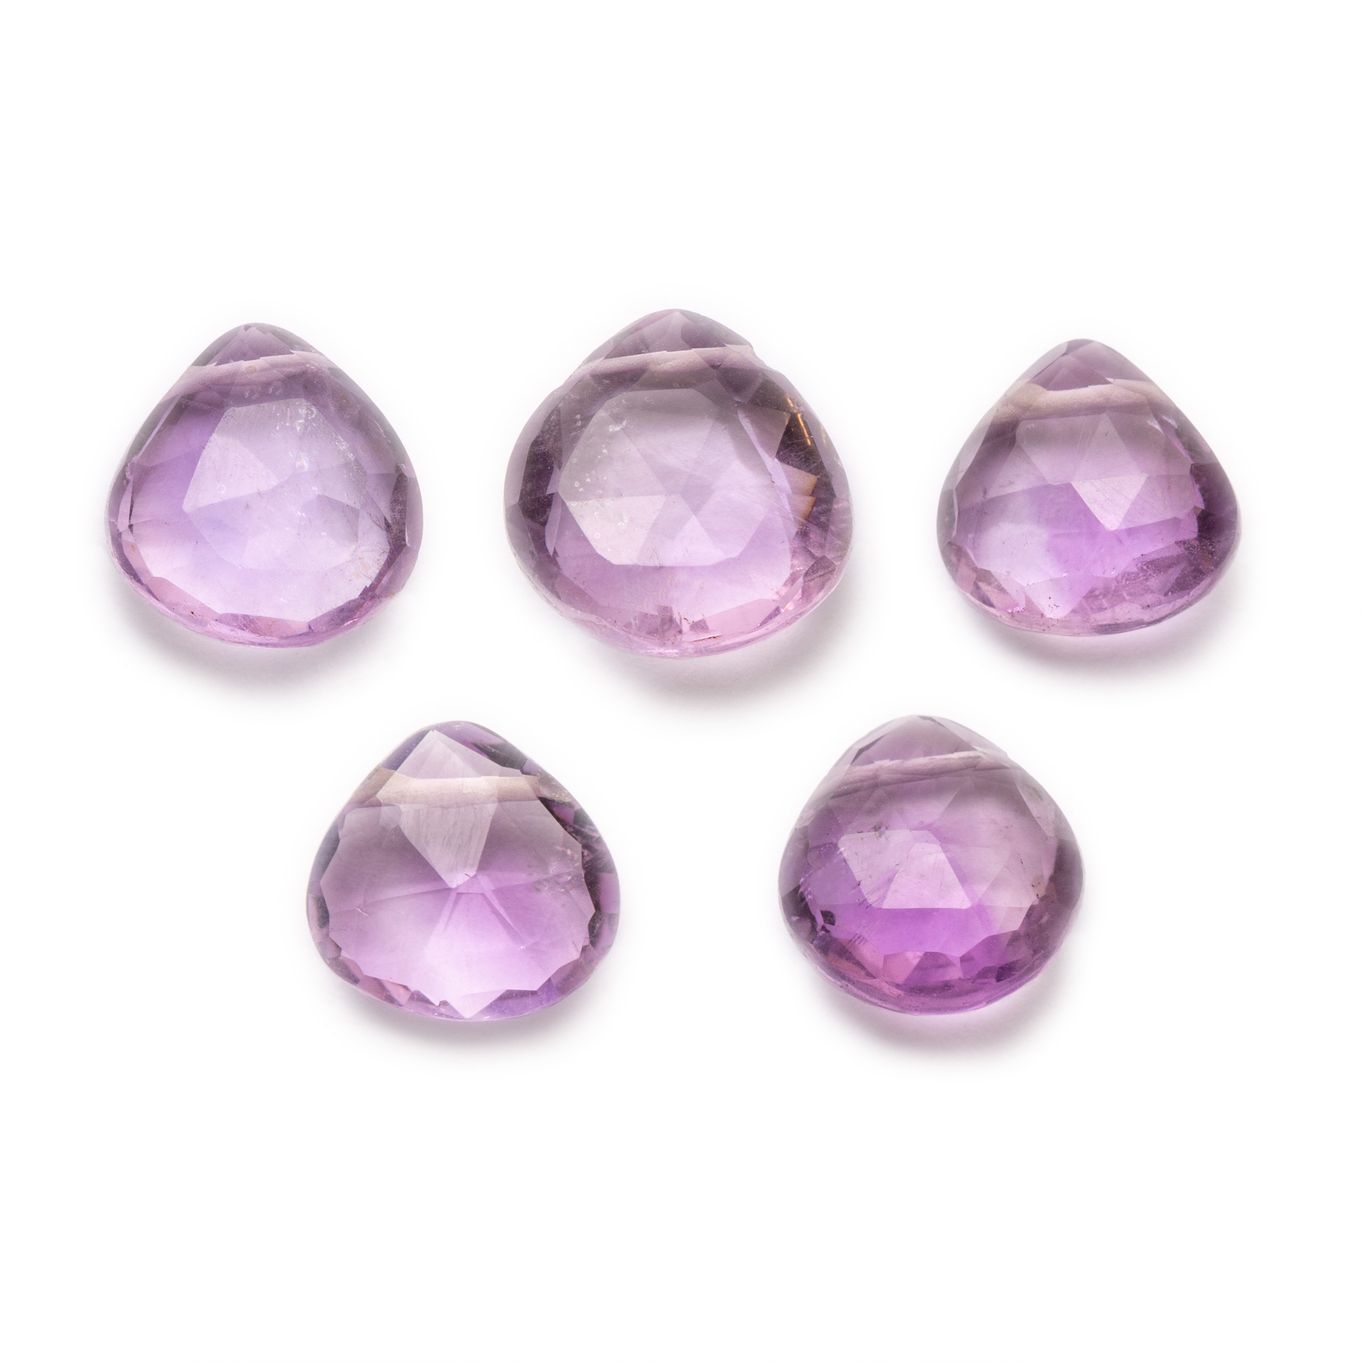 Pink Amethyst Faceted Heart Briolette Beads - Approx From 8mm